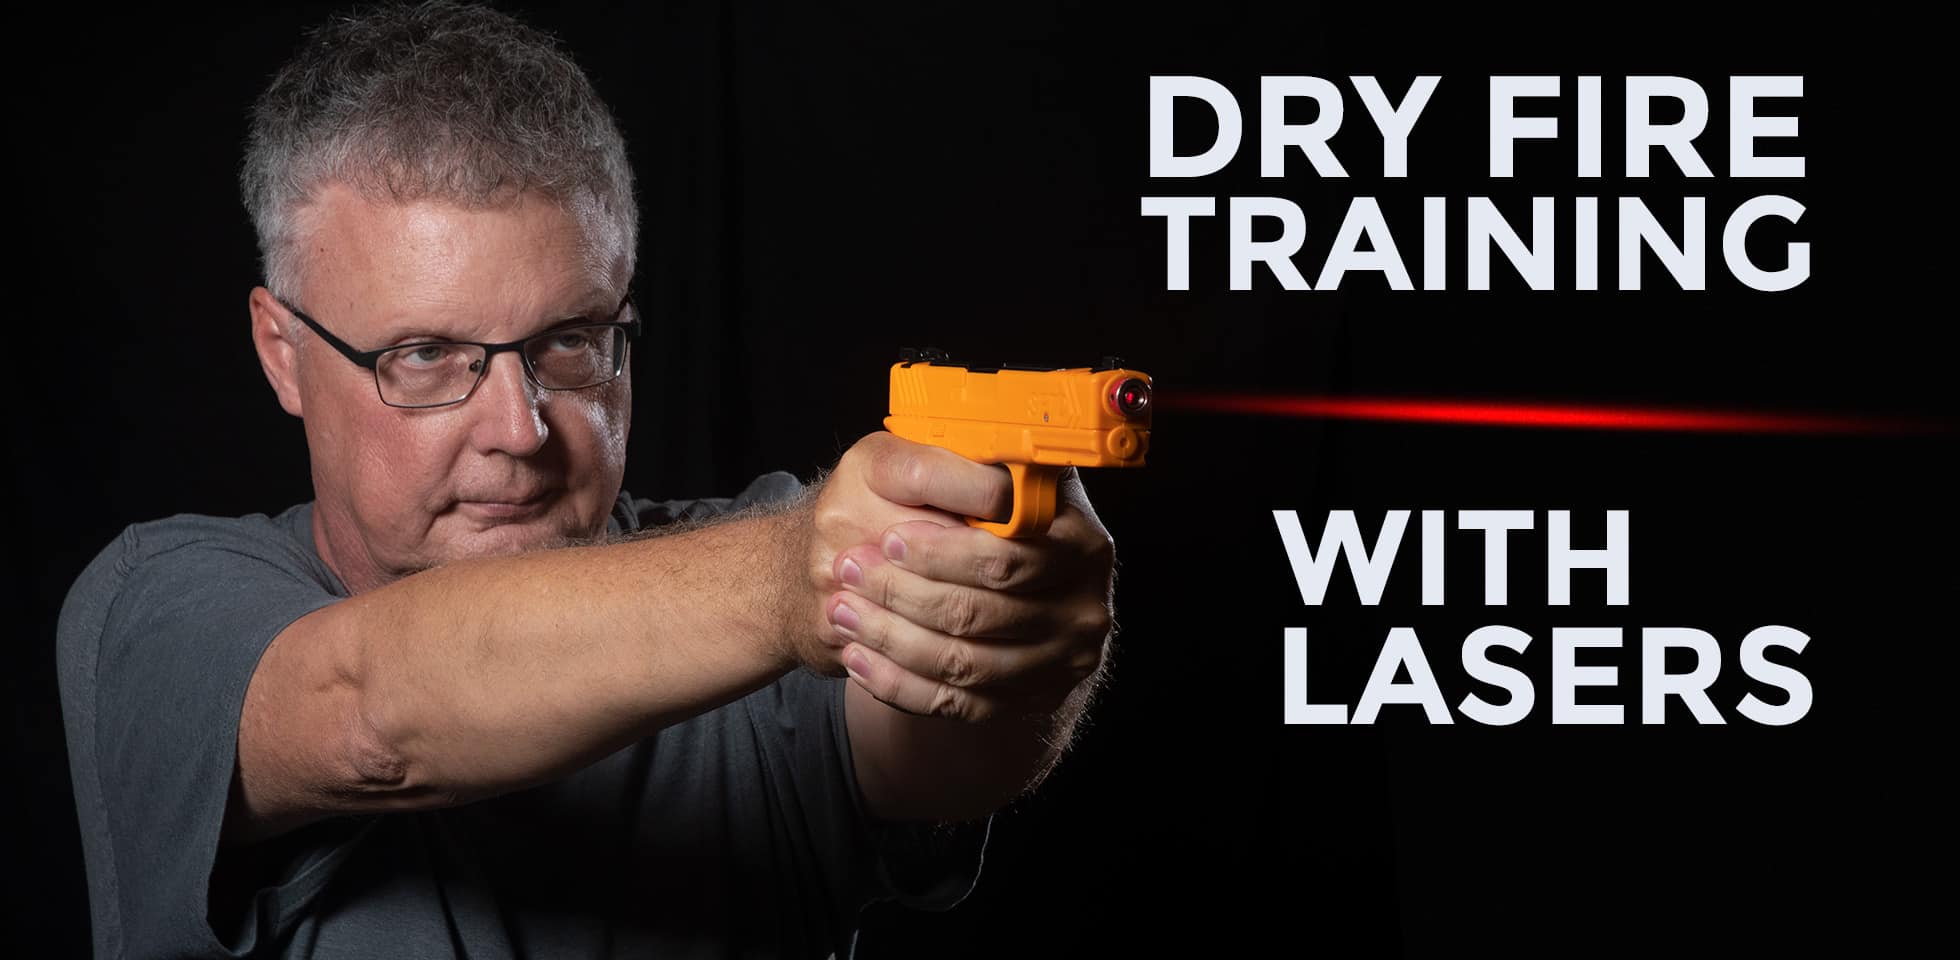 iDryfire Laser Target  Software Only to dry fire with Laser Ammo LaserLyte SIRT 